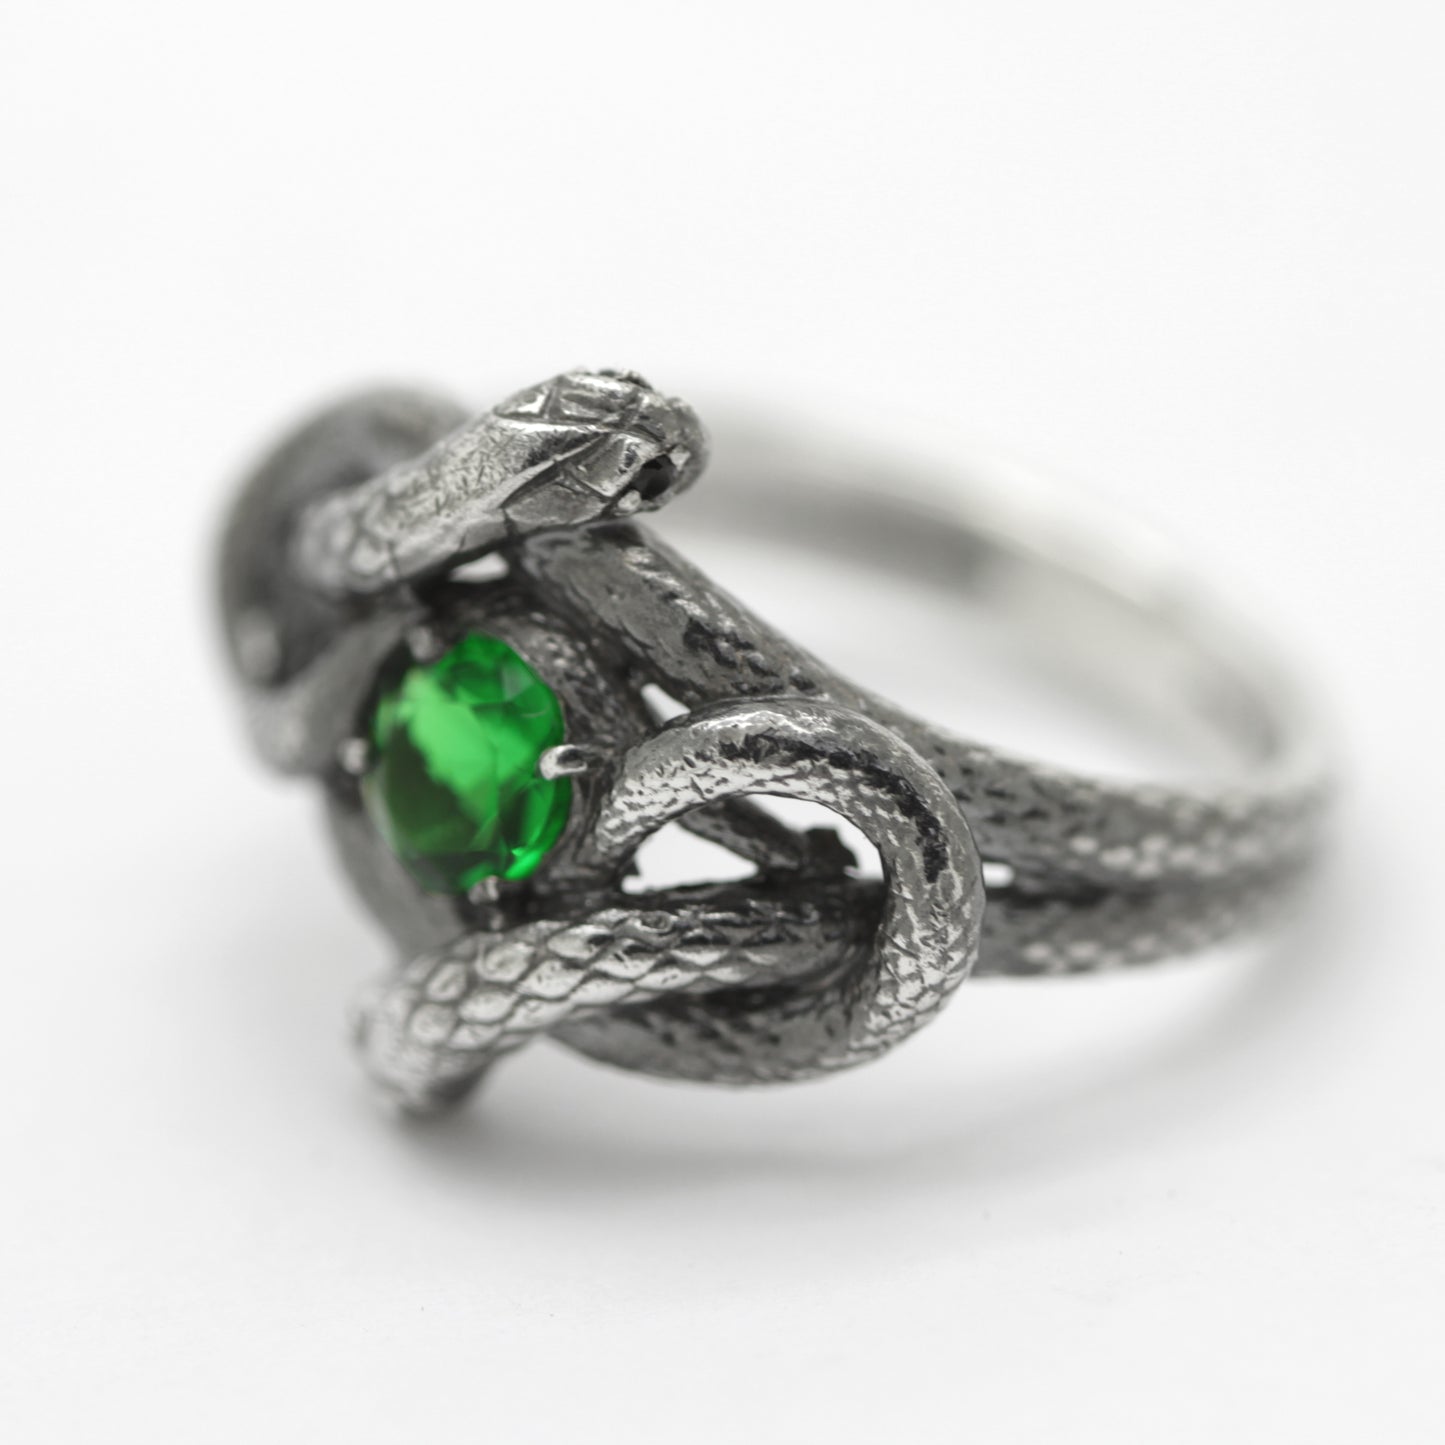 Snakes Knot with Green Gemstone, Women Sterling Silver Ring